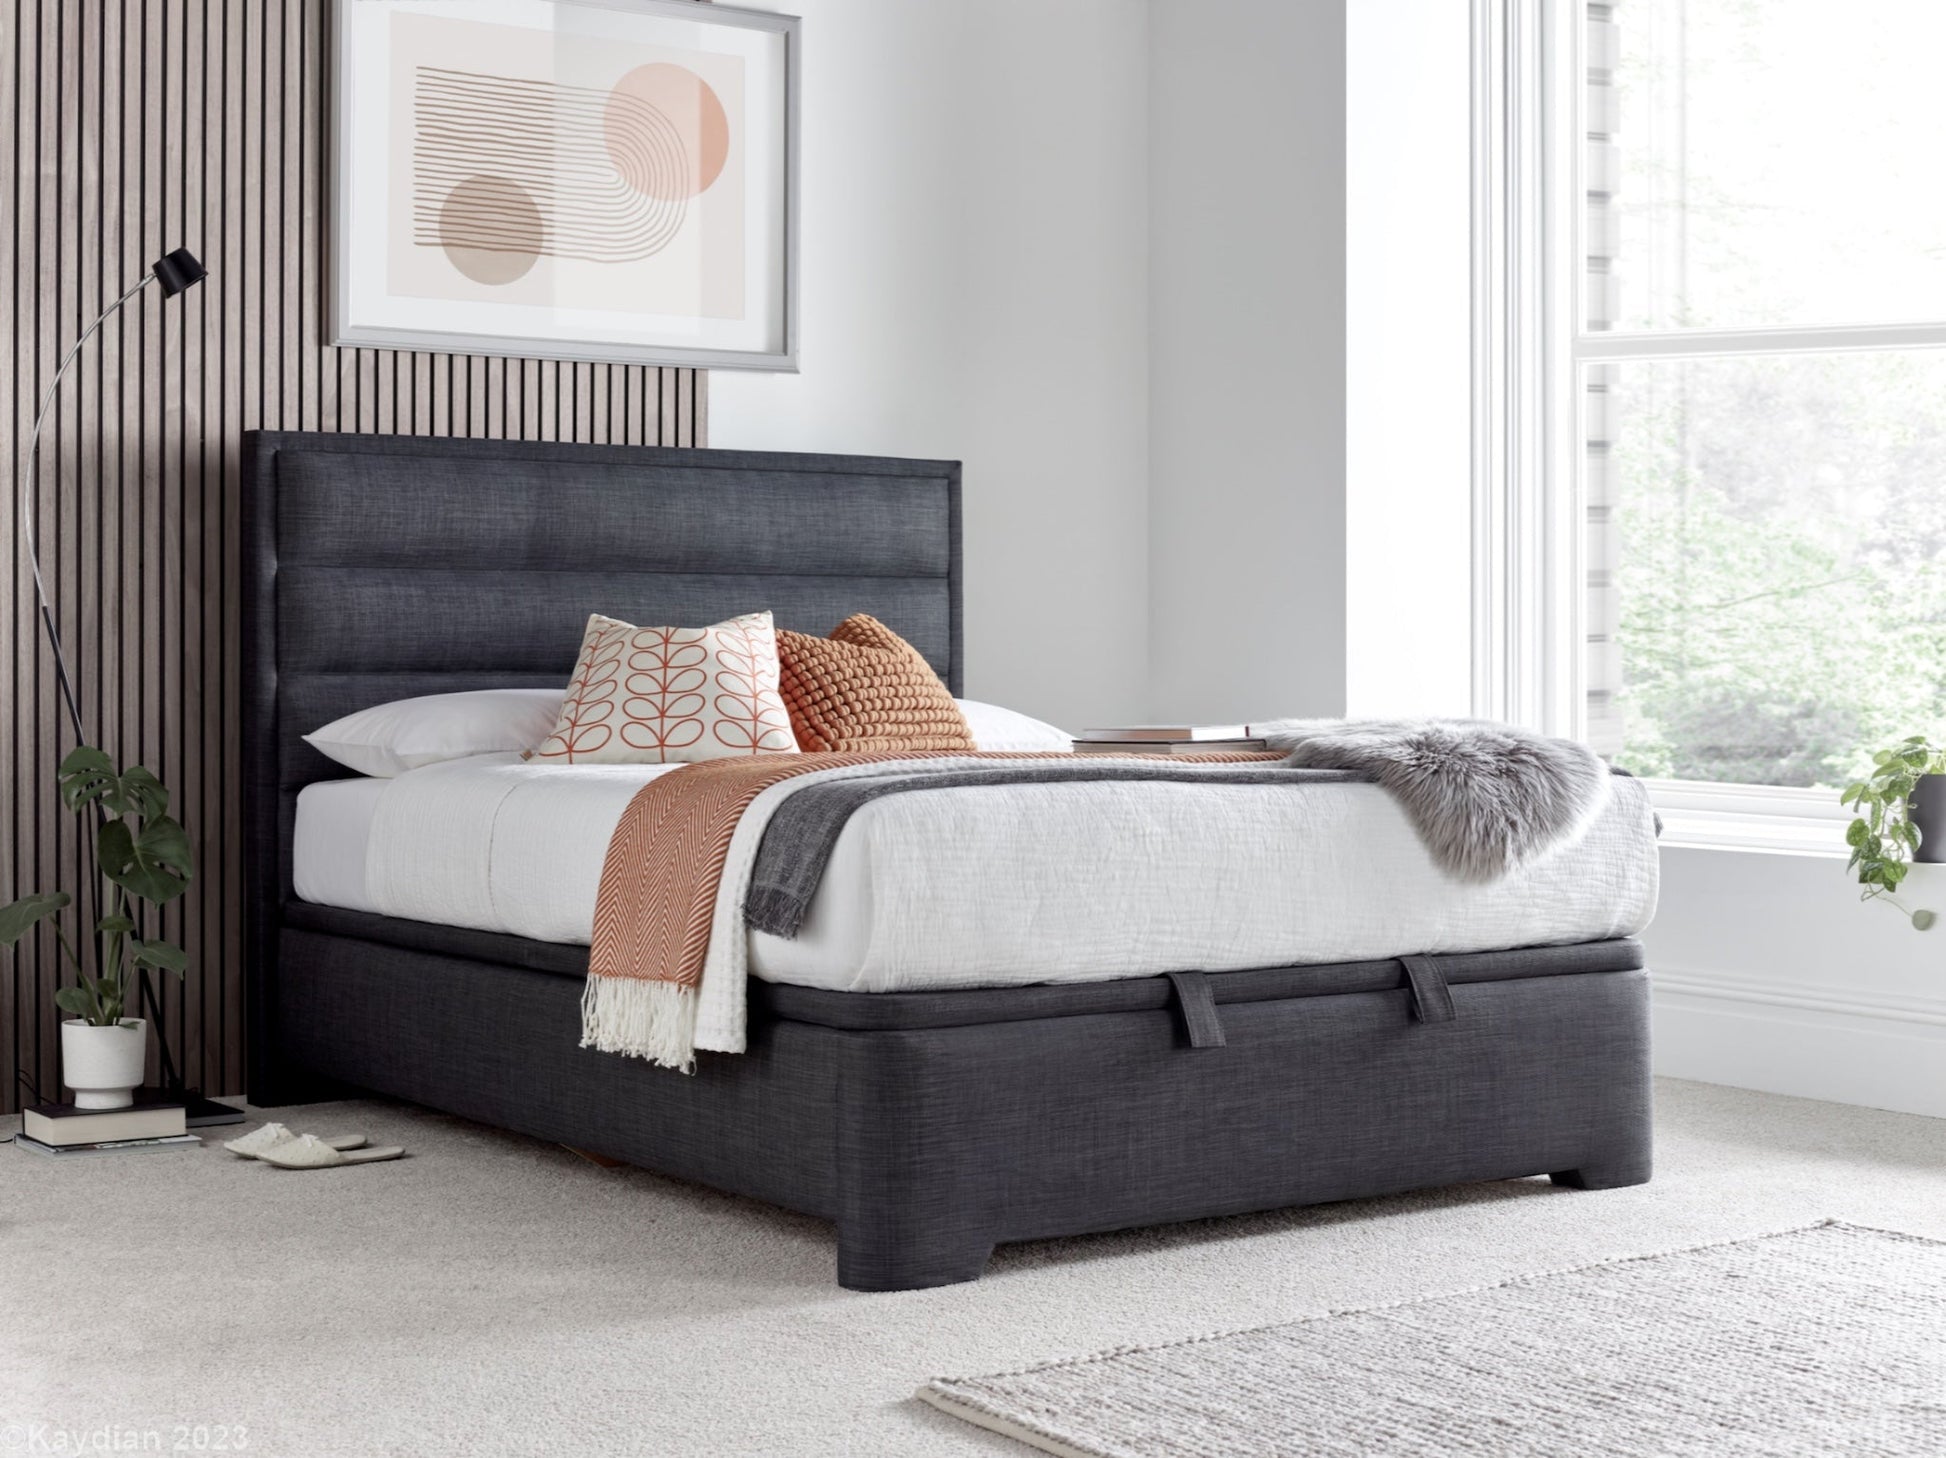 Kirby Ottoman Storage Bed frame - Slate Grey by Kaydian Design LTD in KIRFL135SL only at TV Beds Northwest